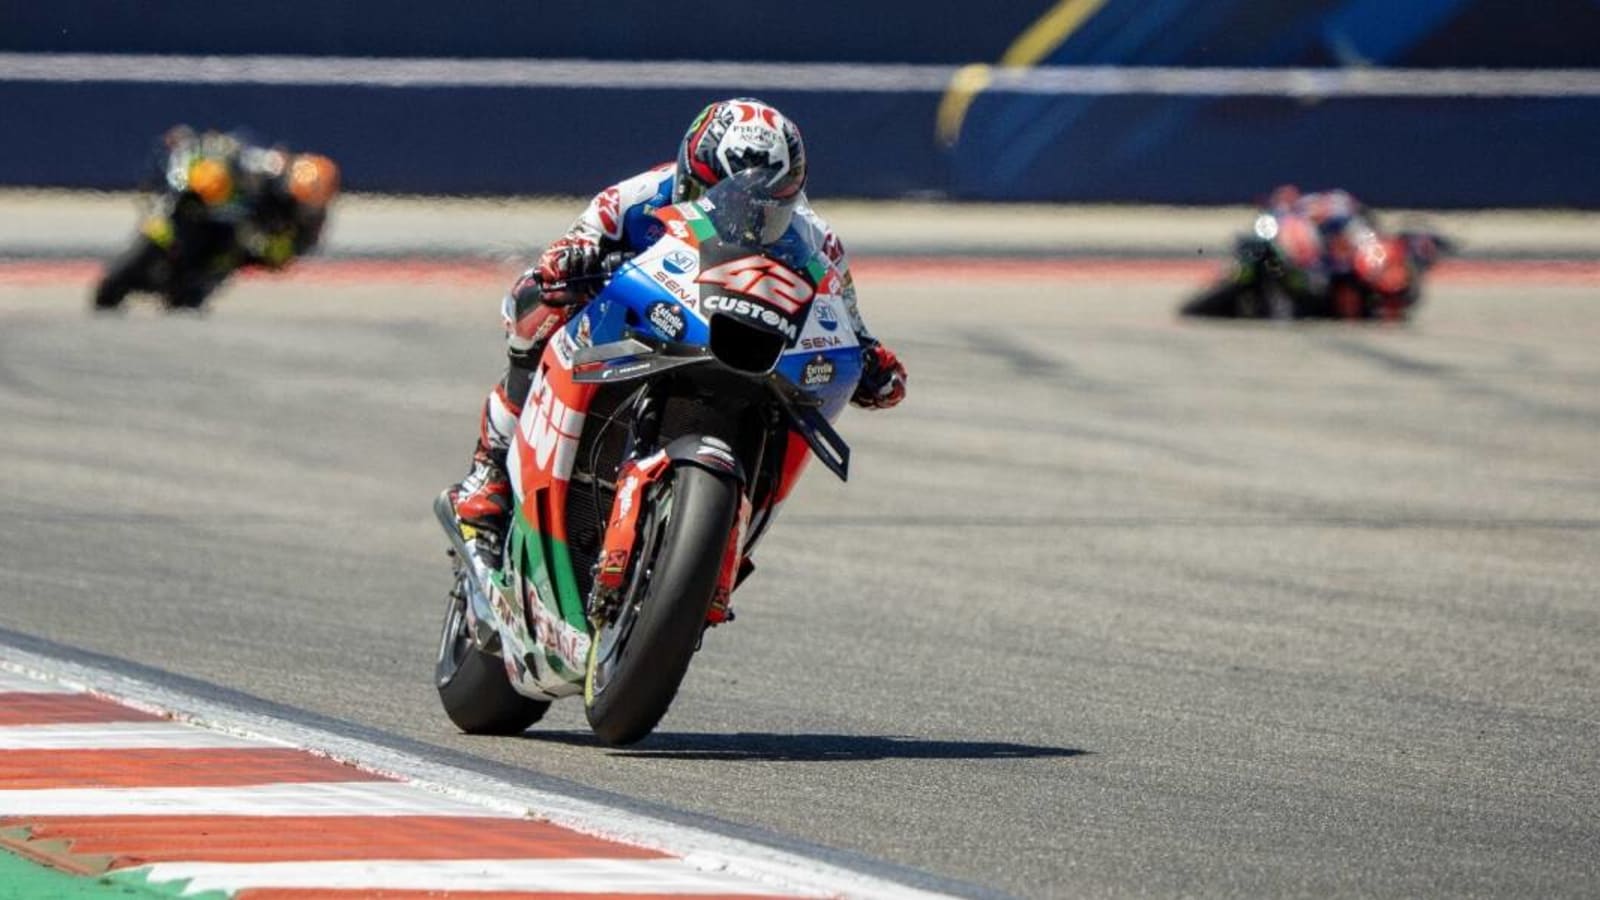 Trackhouse Racing adds MotoGP team based out of Italy